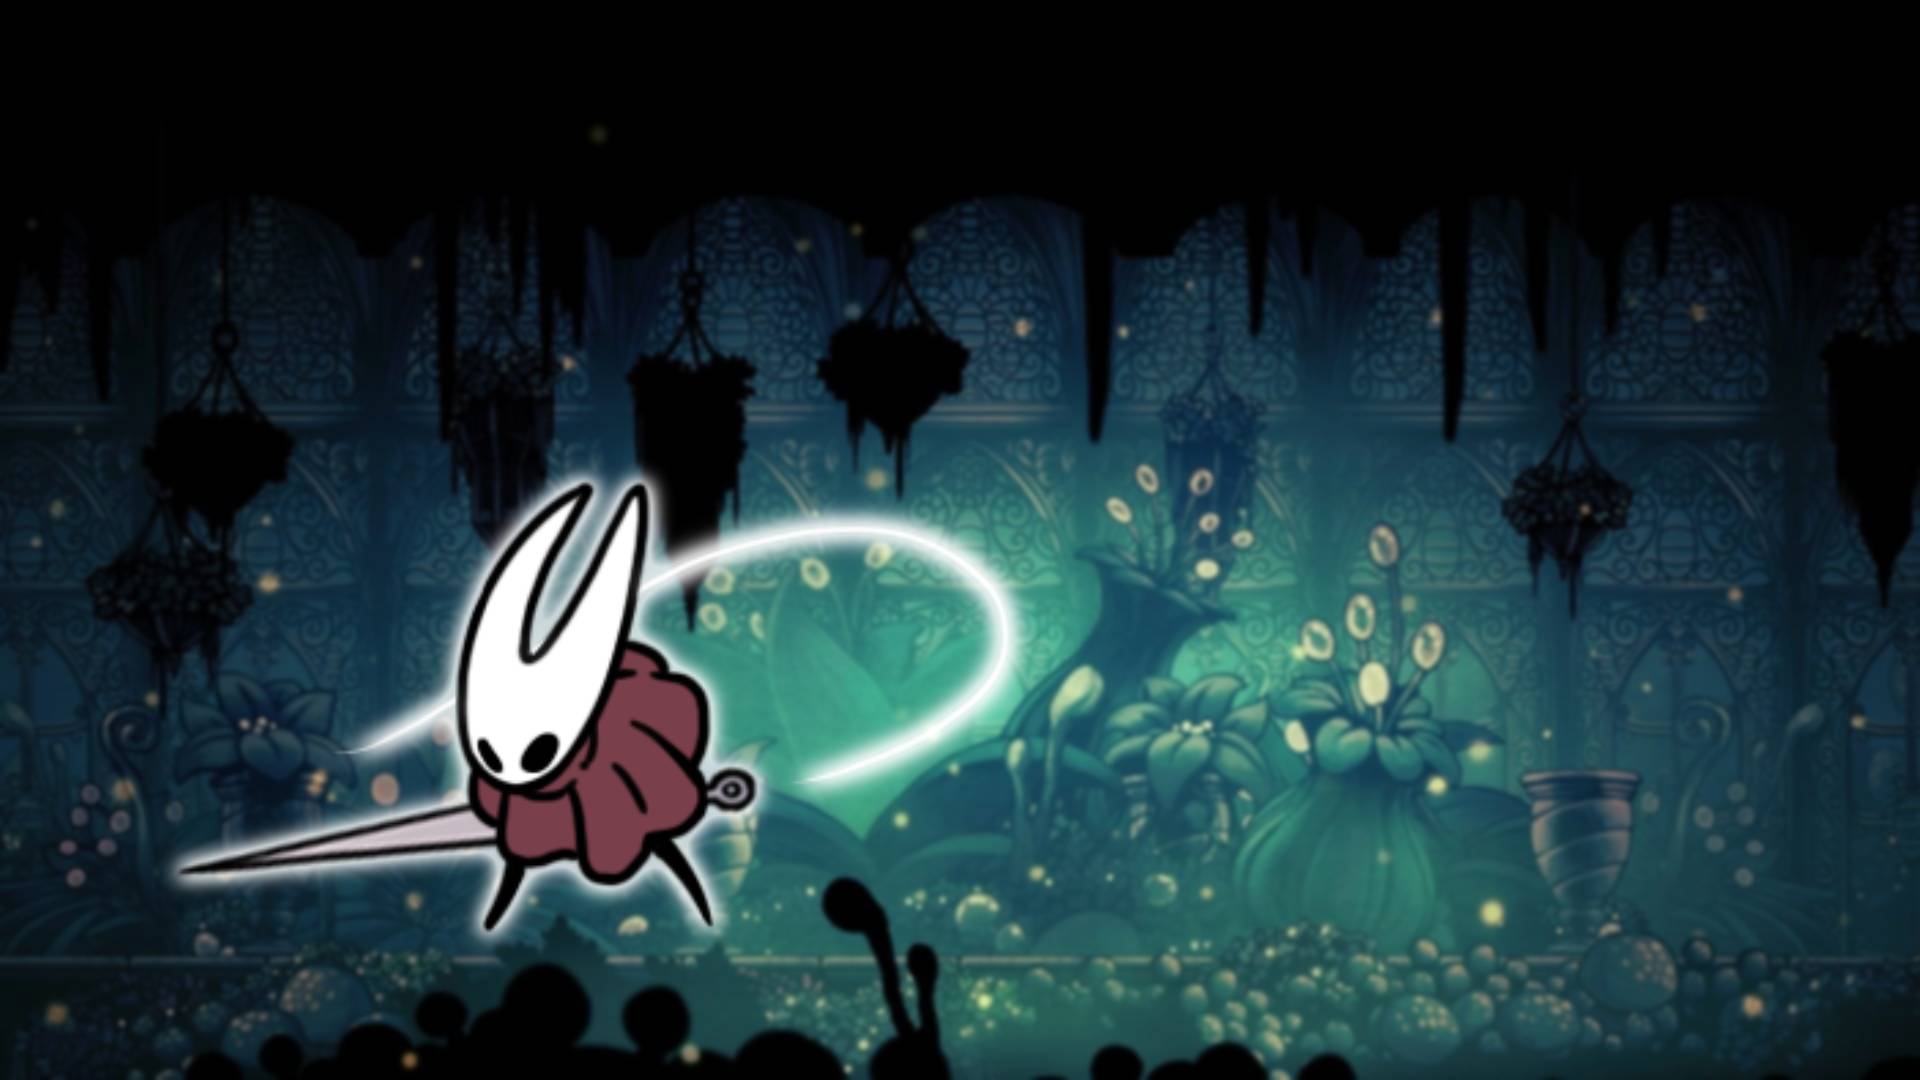 Hornet - the Hollow Knight boss, is visible against a mossy green background area from Hollow Knight 